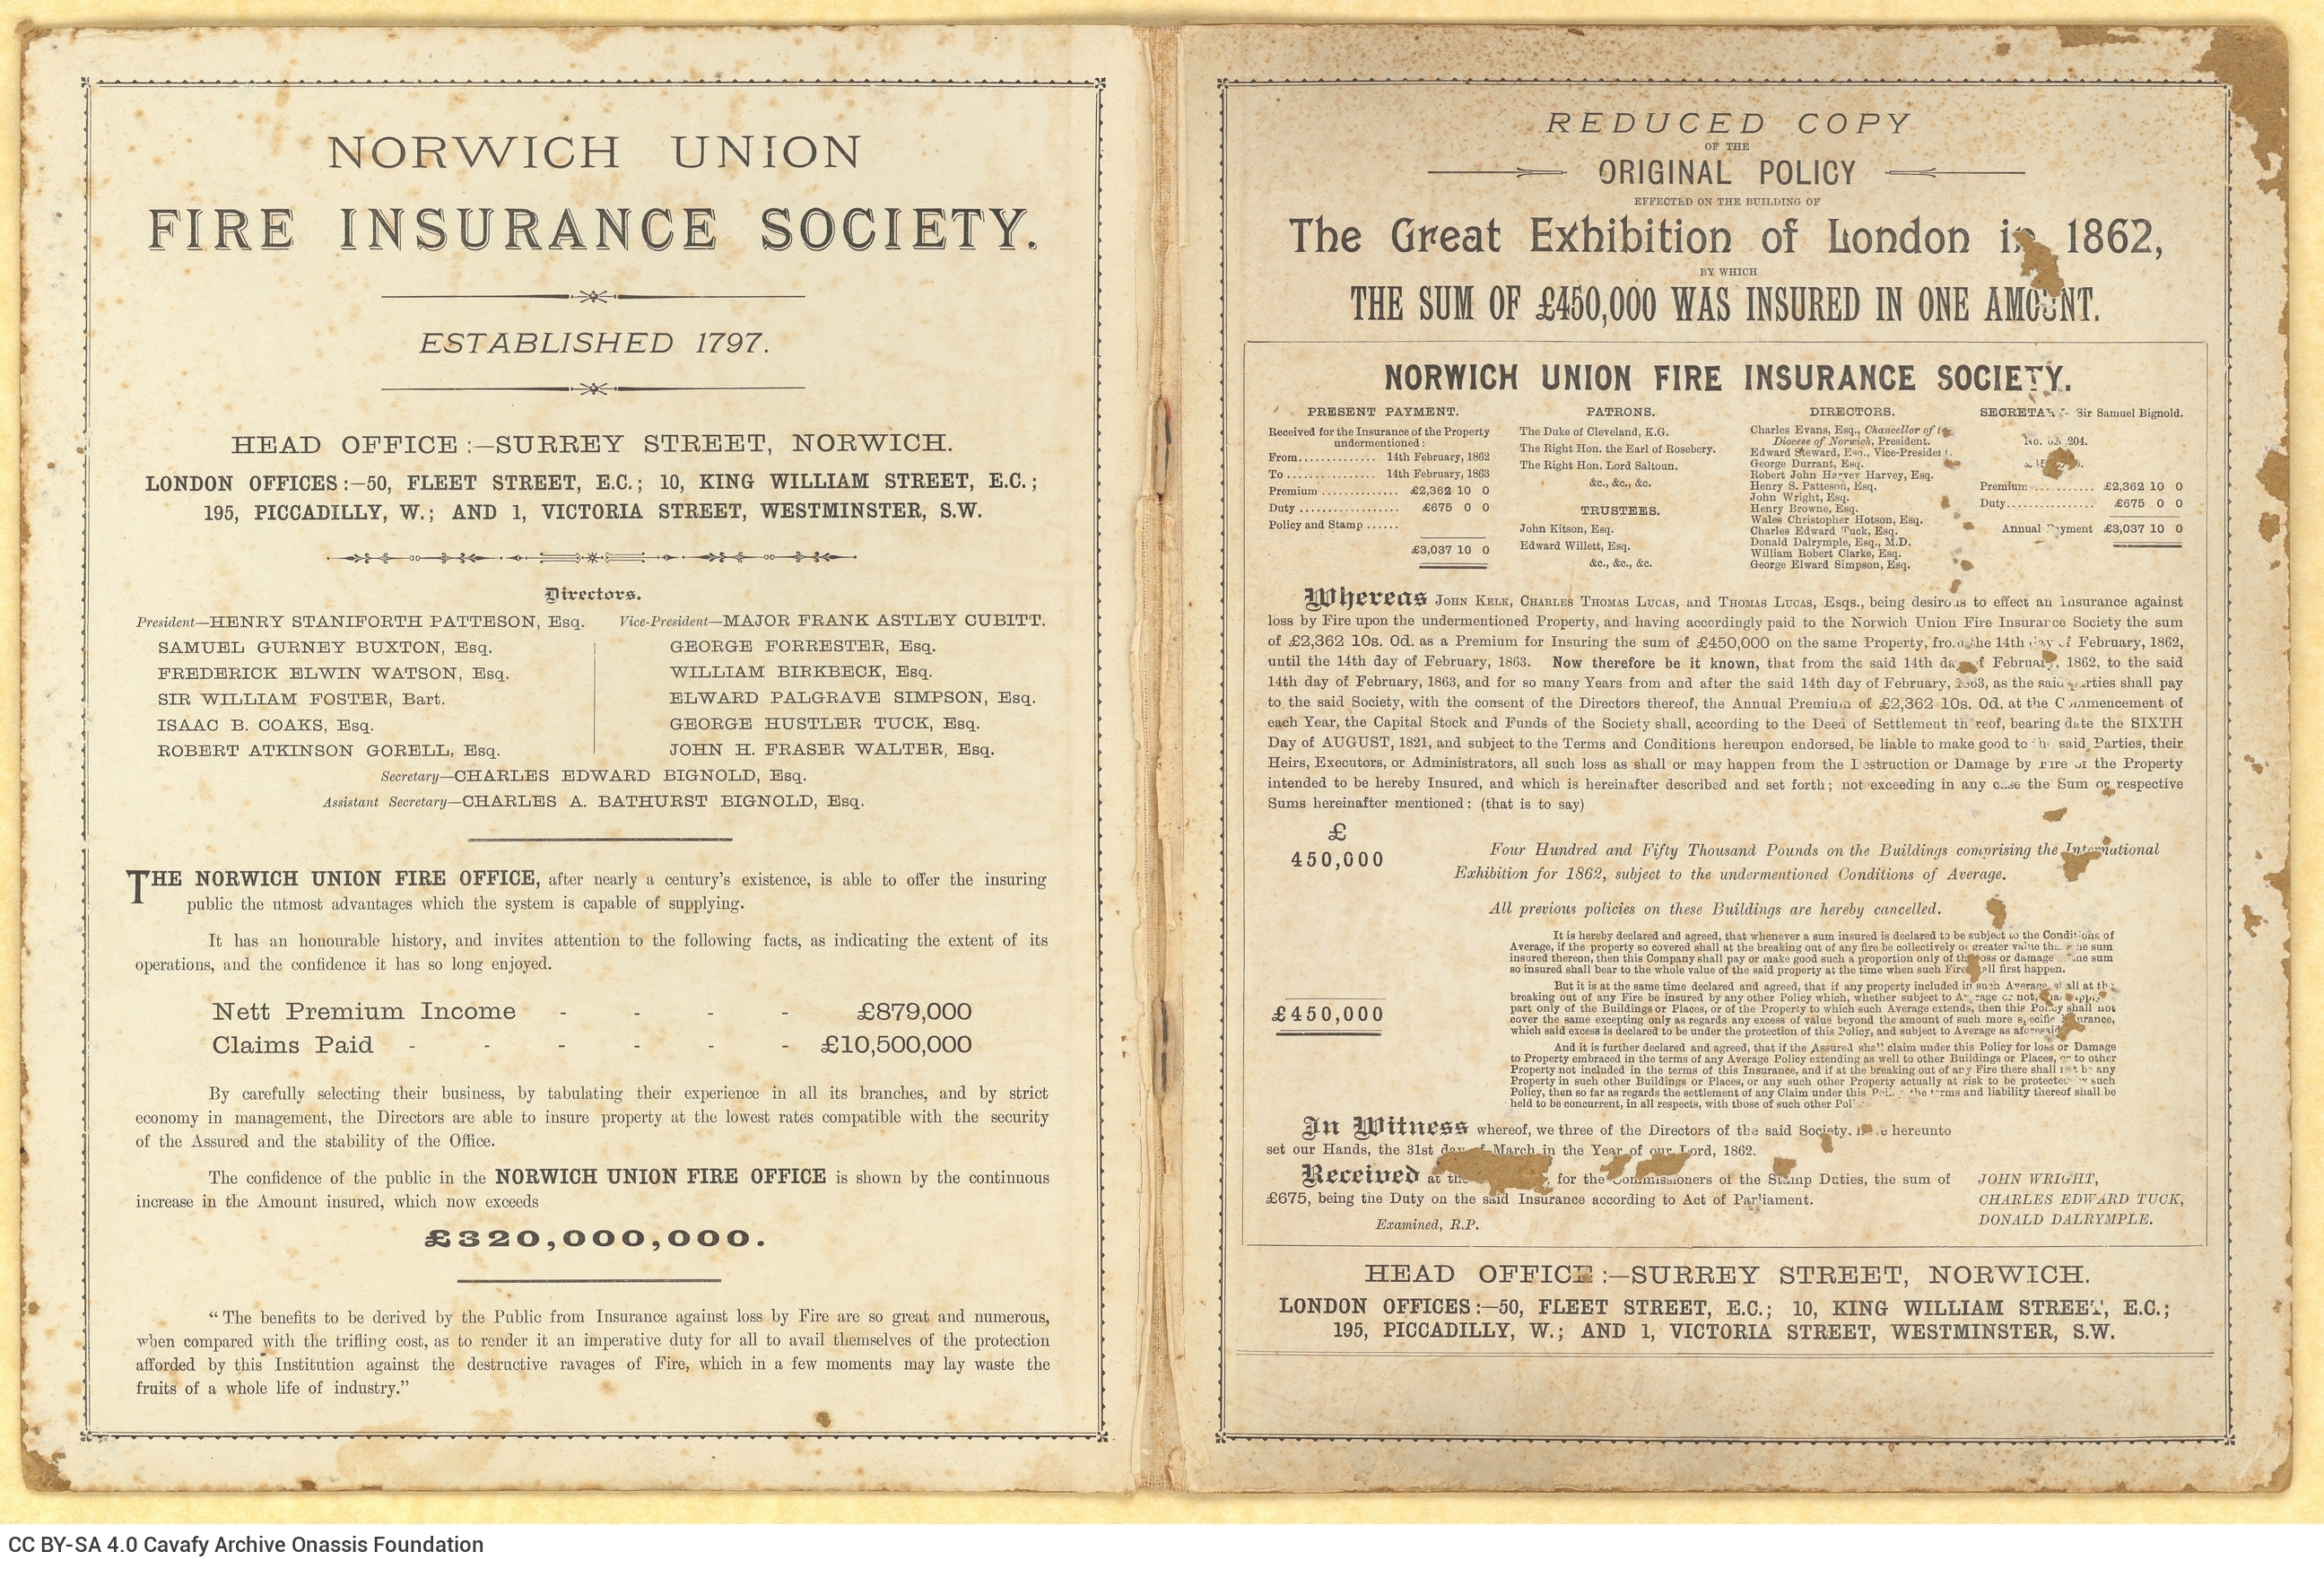 Double-sheet cover made of hard paperboard of a British fire insurance company (1894-1895 edition). Handwritten note by Cavaf